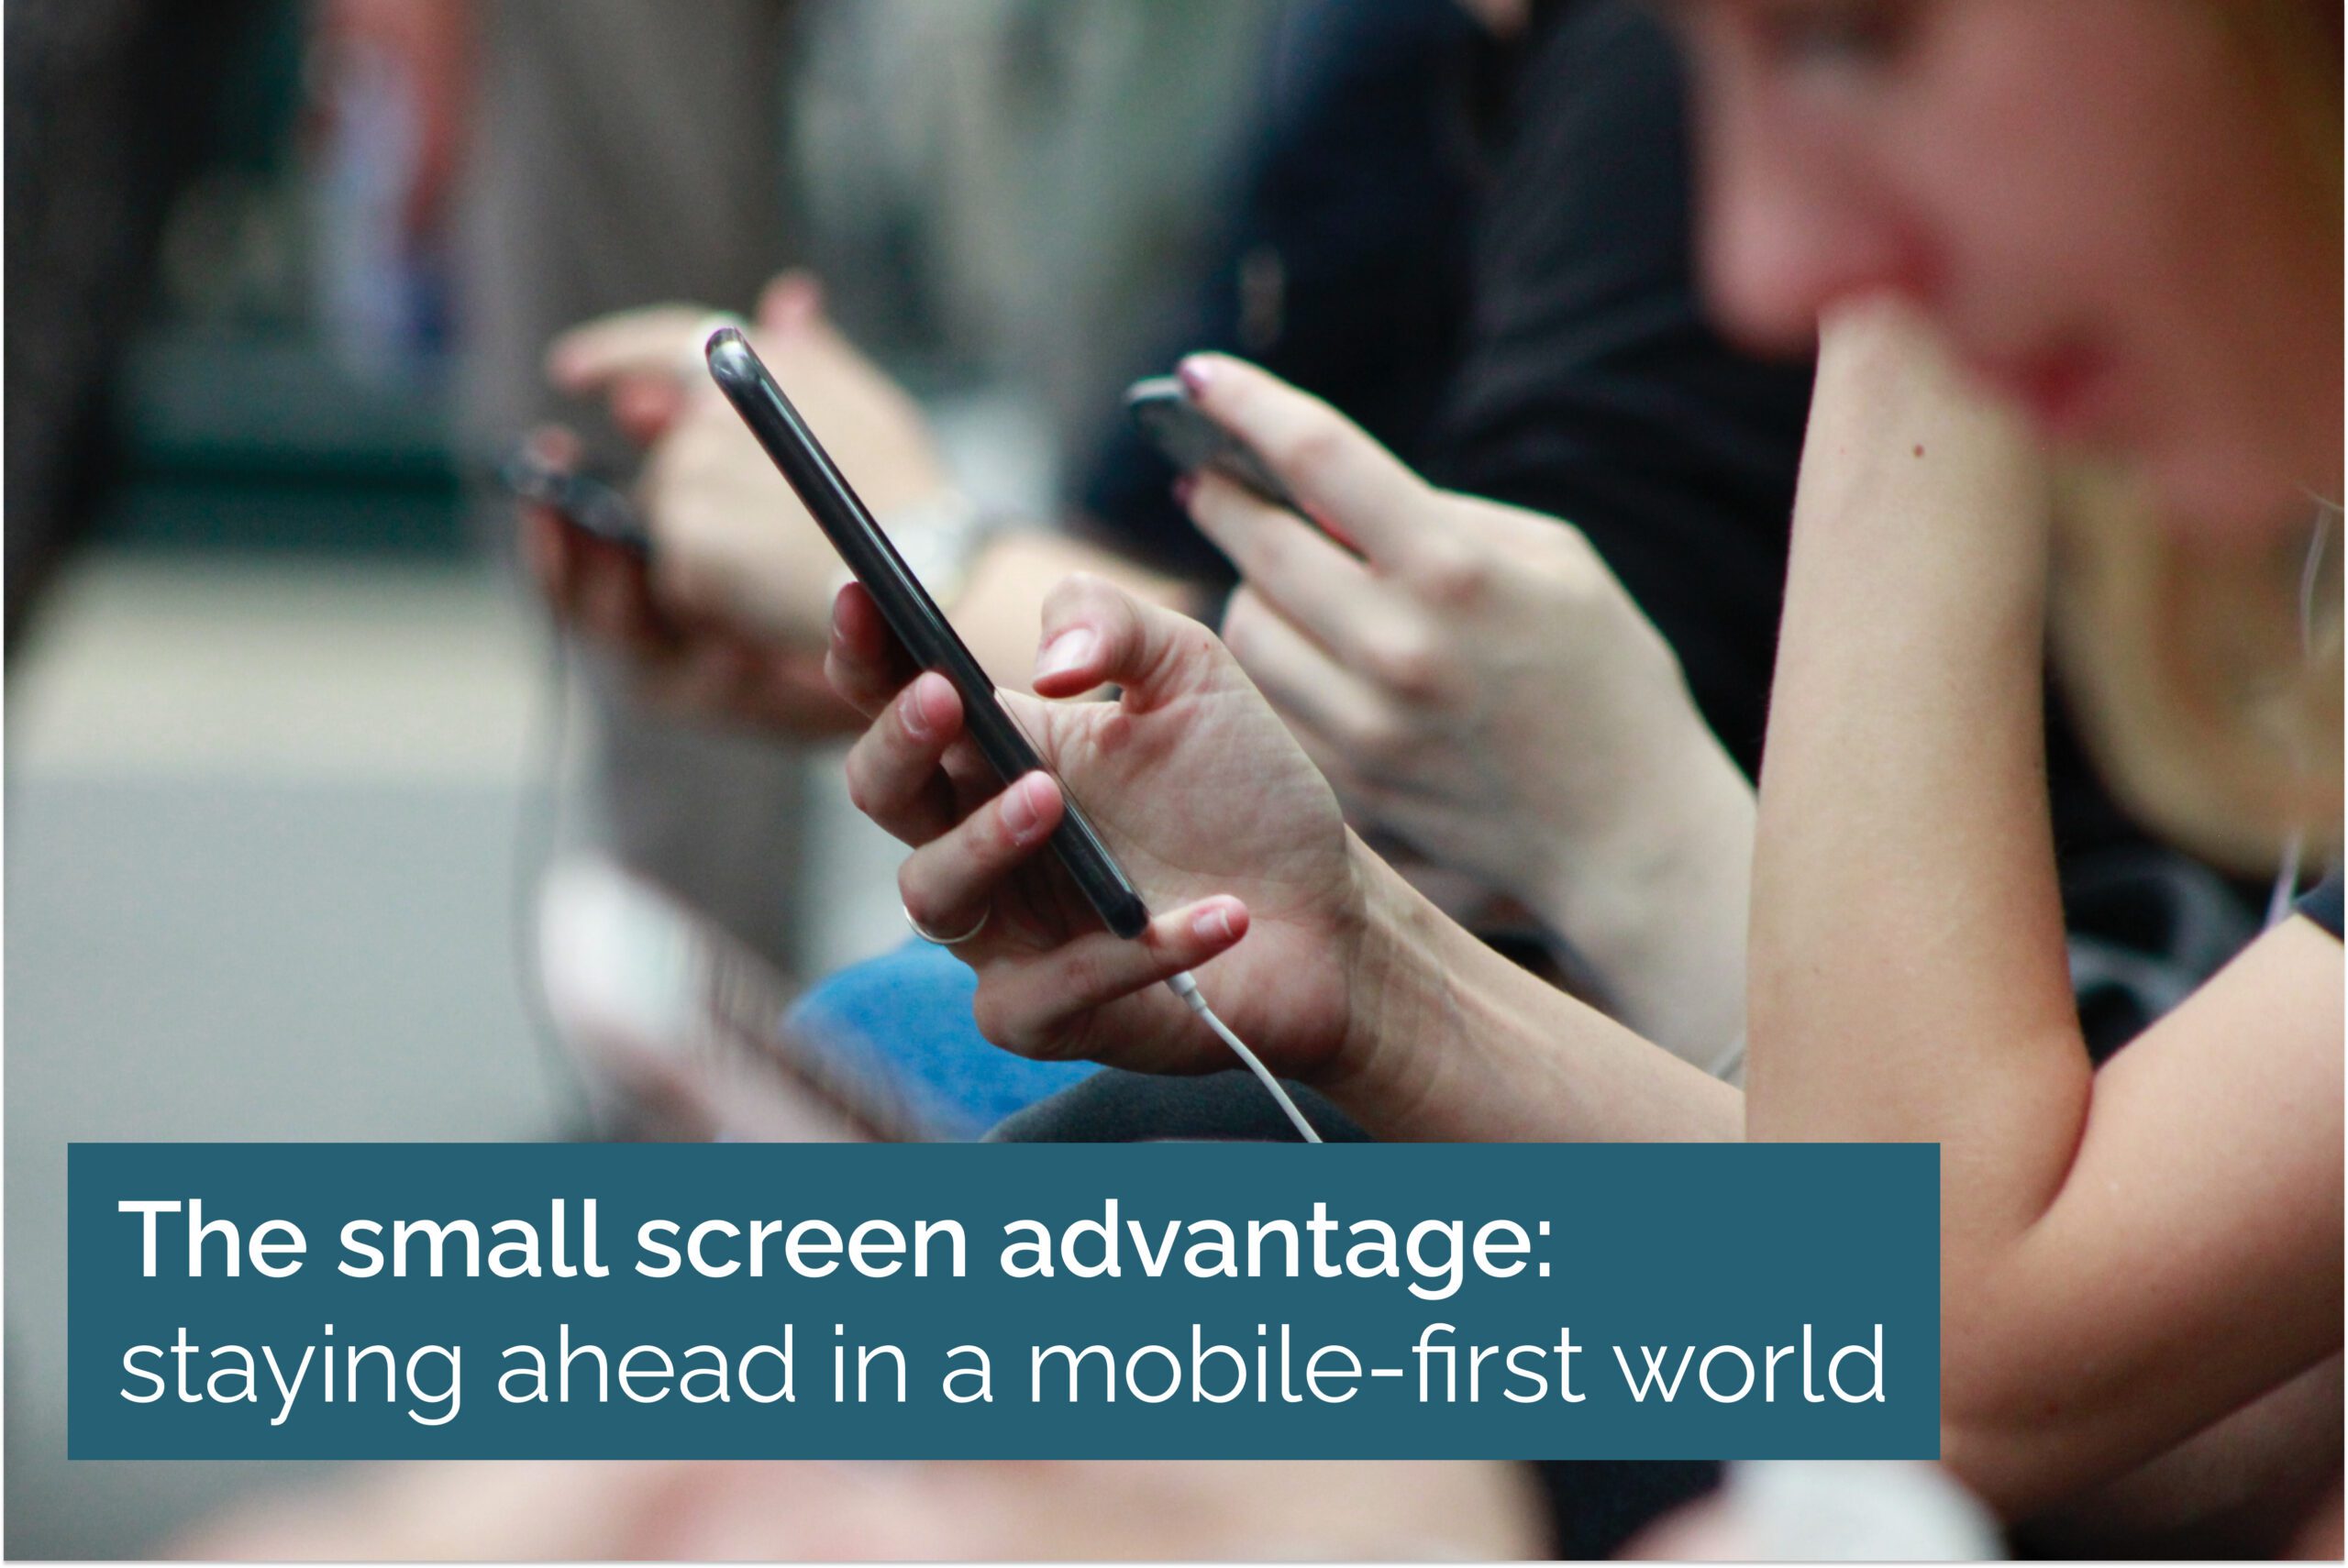 The small screen advantage: staying ahead in a mobile-first world